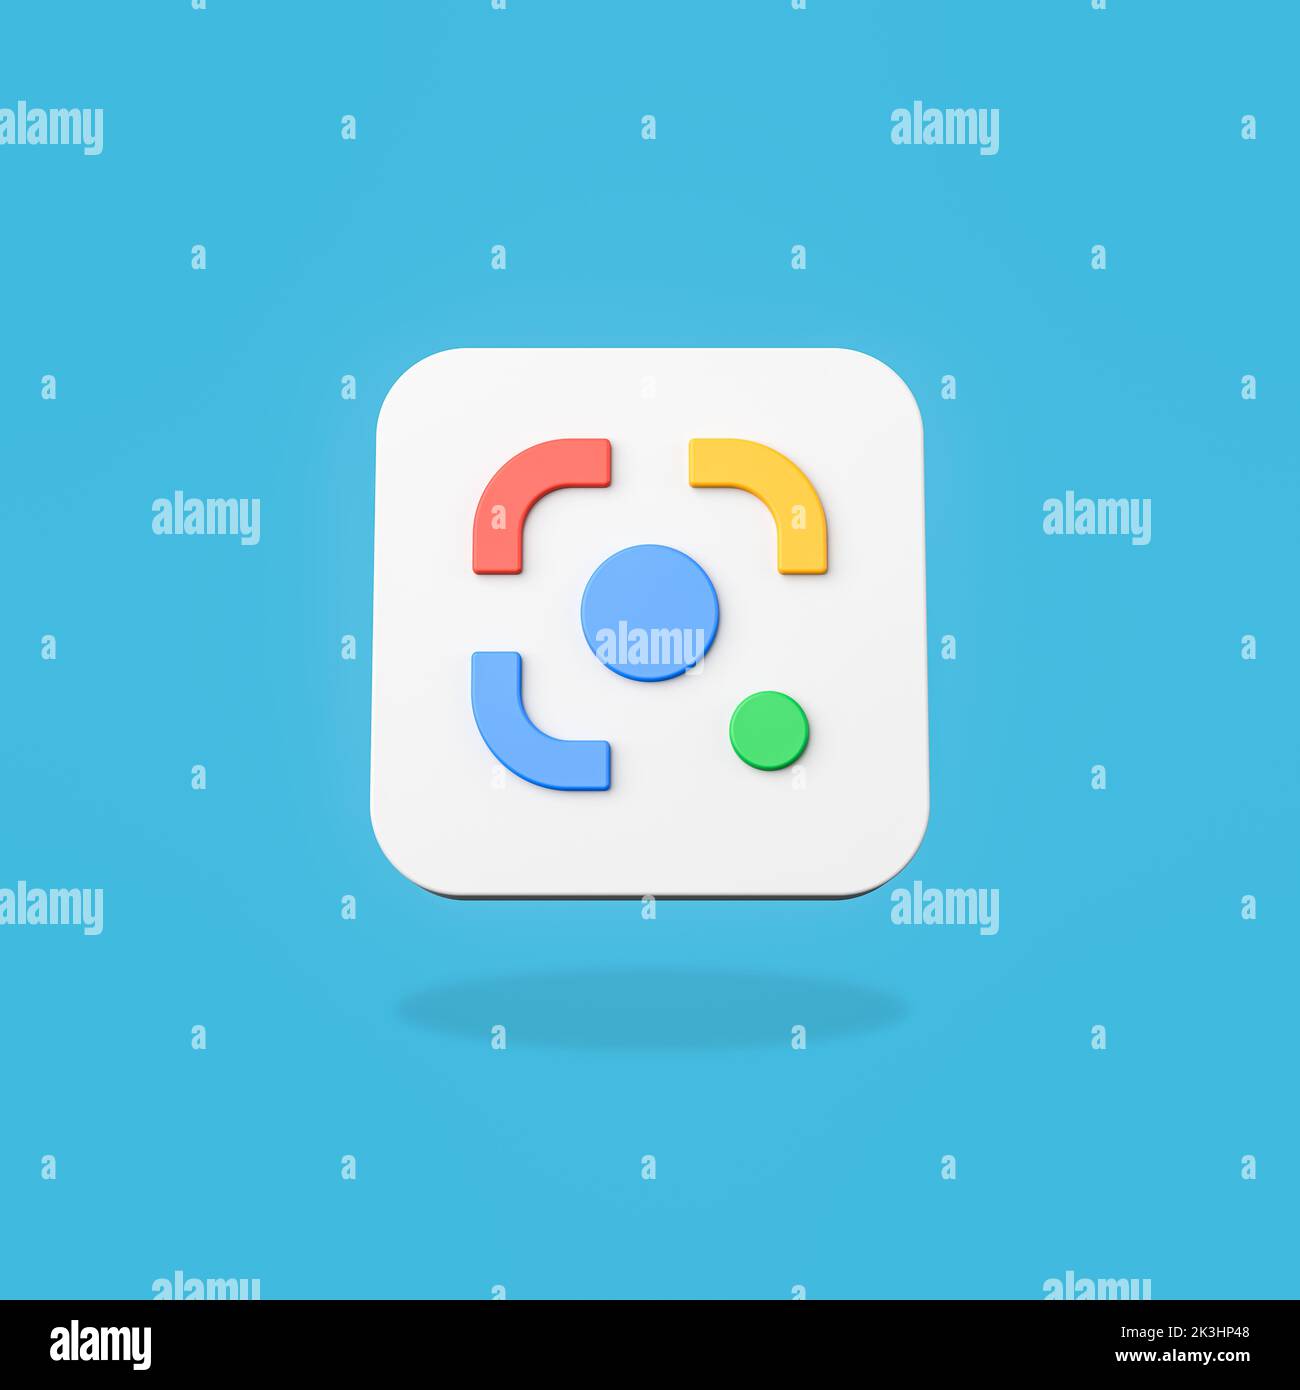 Google Lens App Icon Shape Isolated on Flat Blue Background with Shadow 3D Illustration Stock Photo